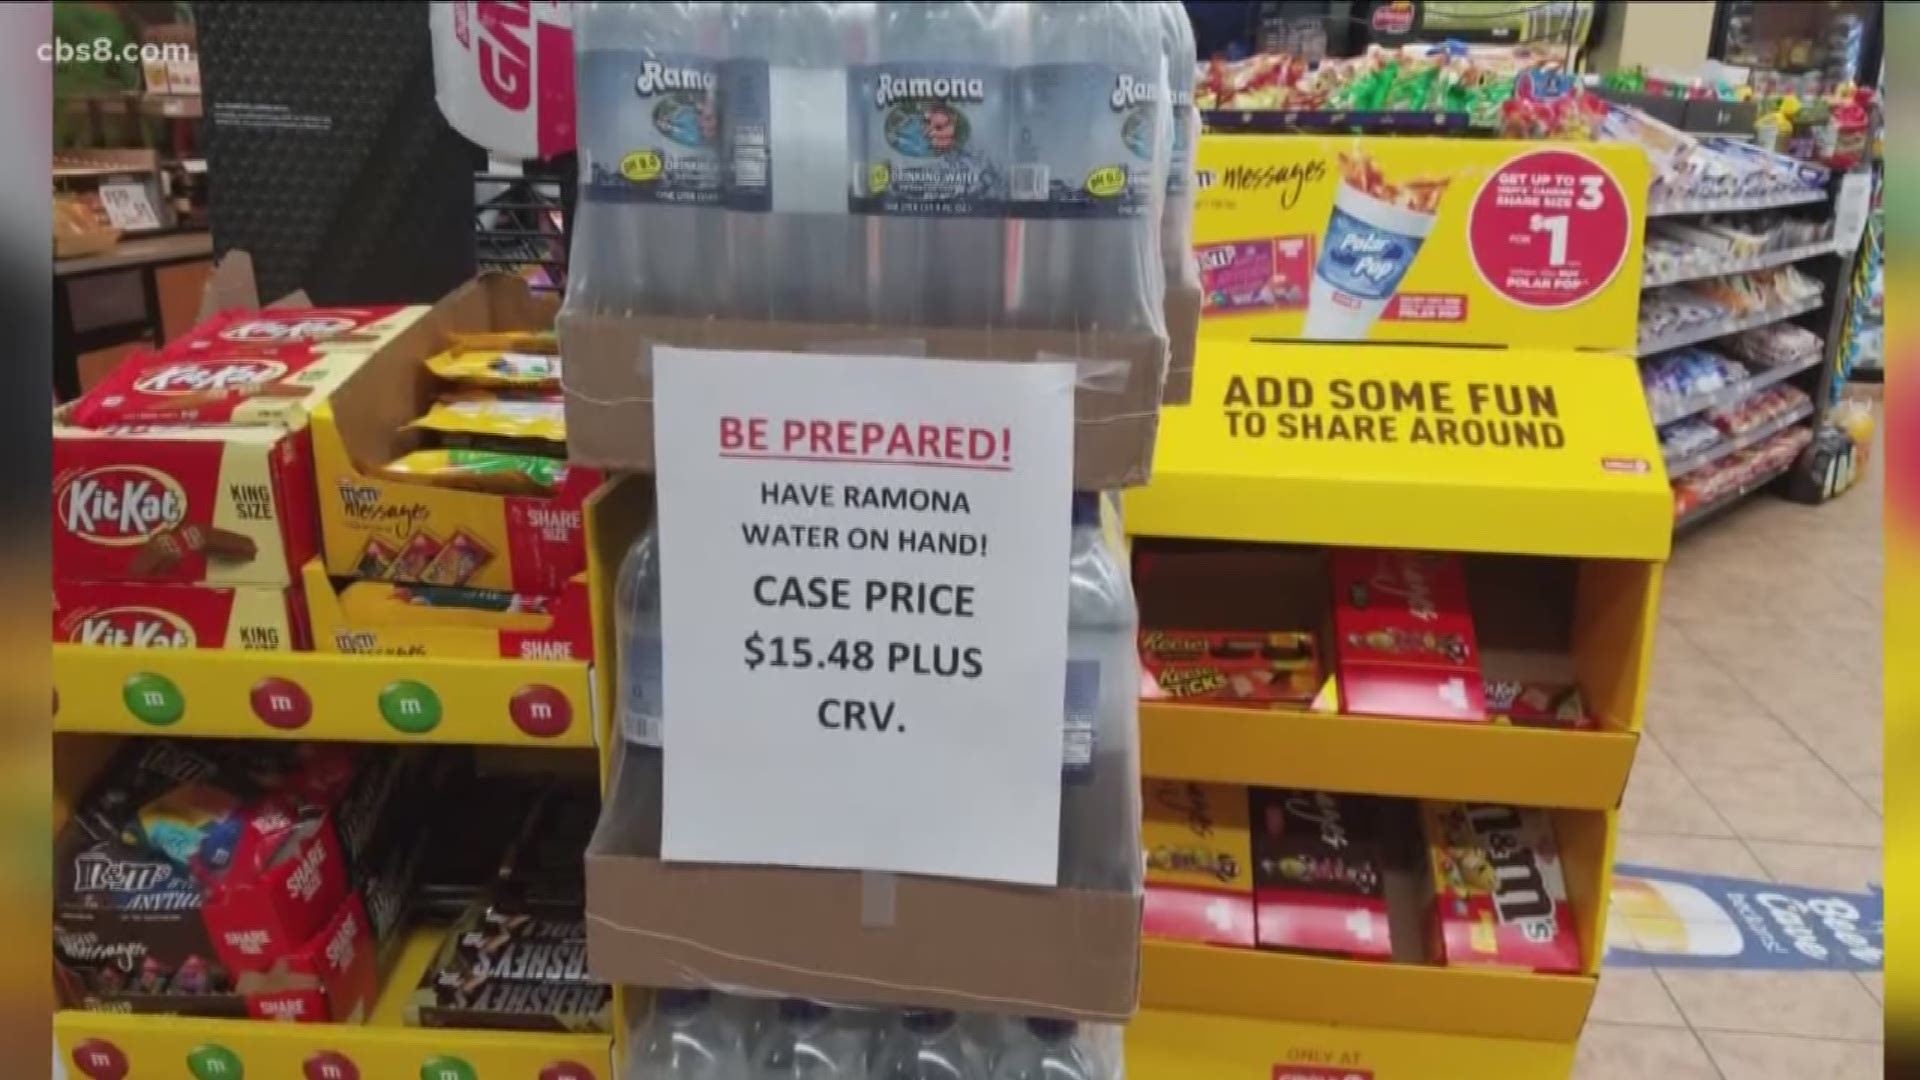 Report suspected price gouging to San Diego's District Protection Unit.